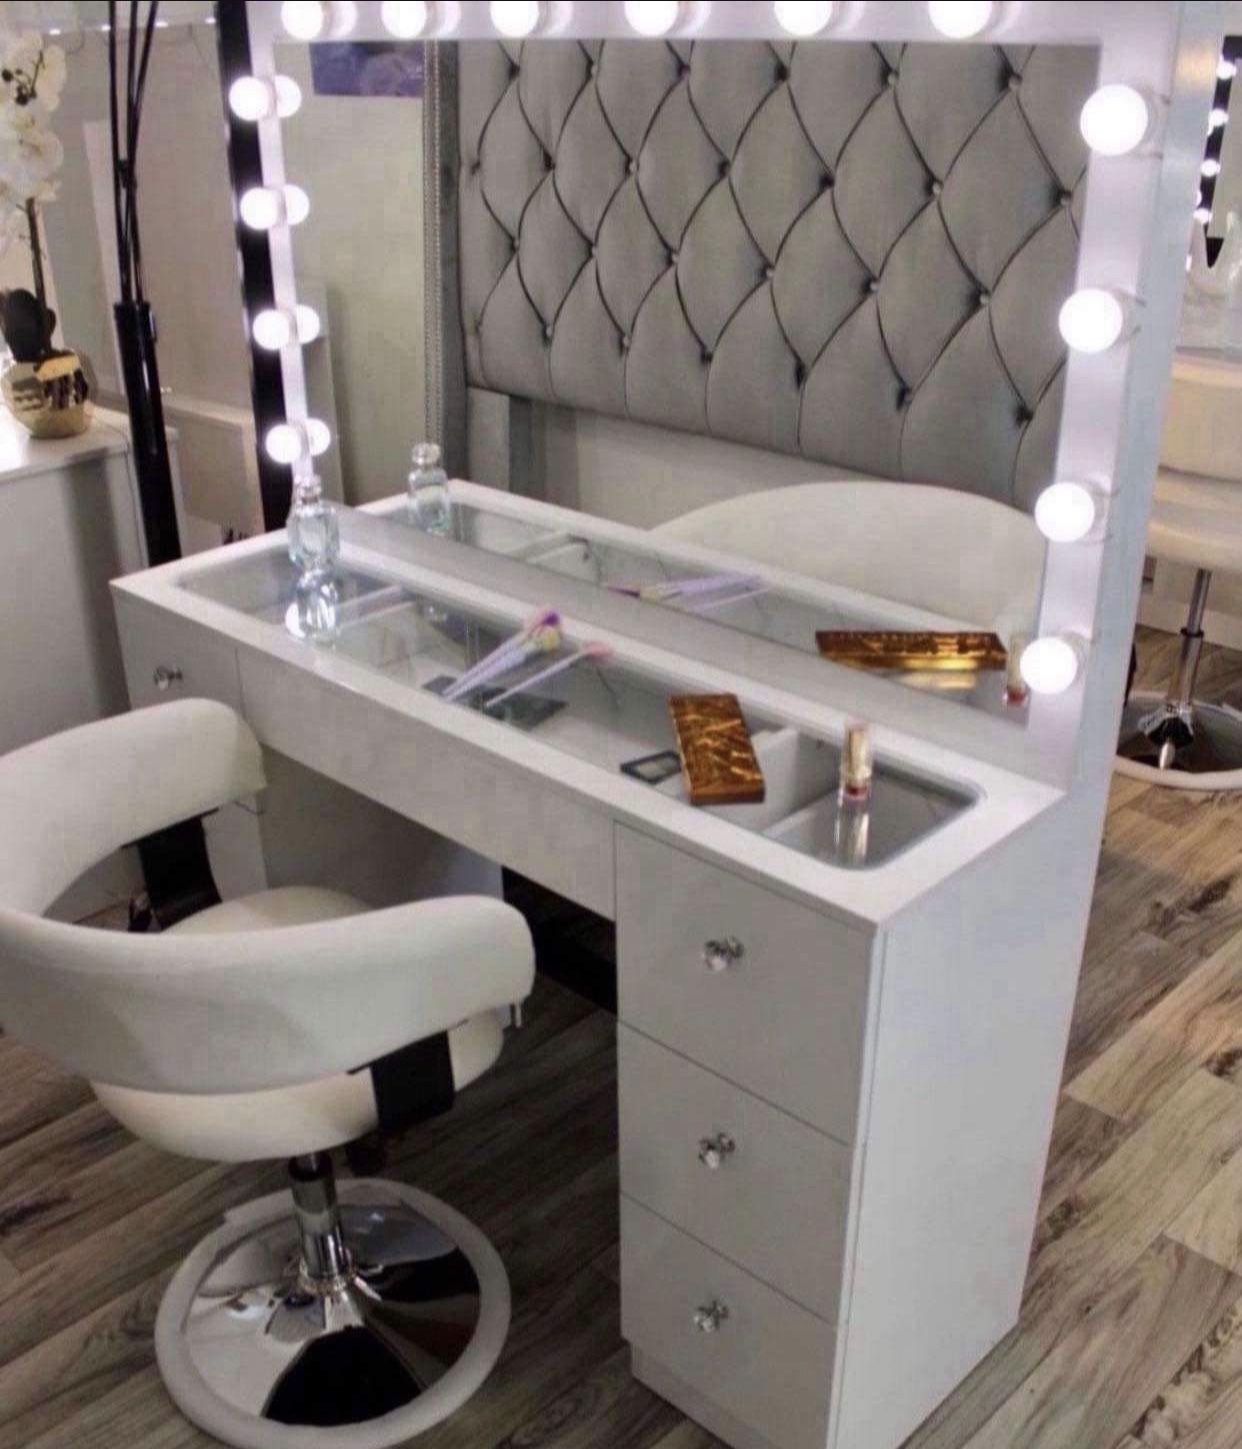 New Glass Top Make Up Vanity Desk With Mirror & Lights